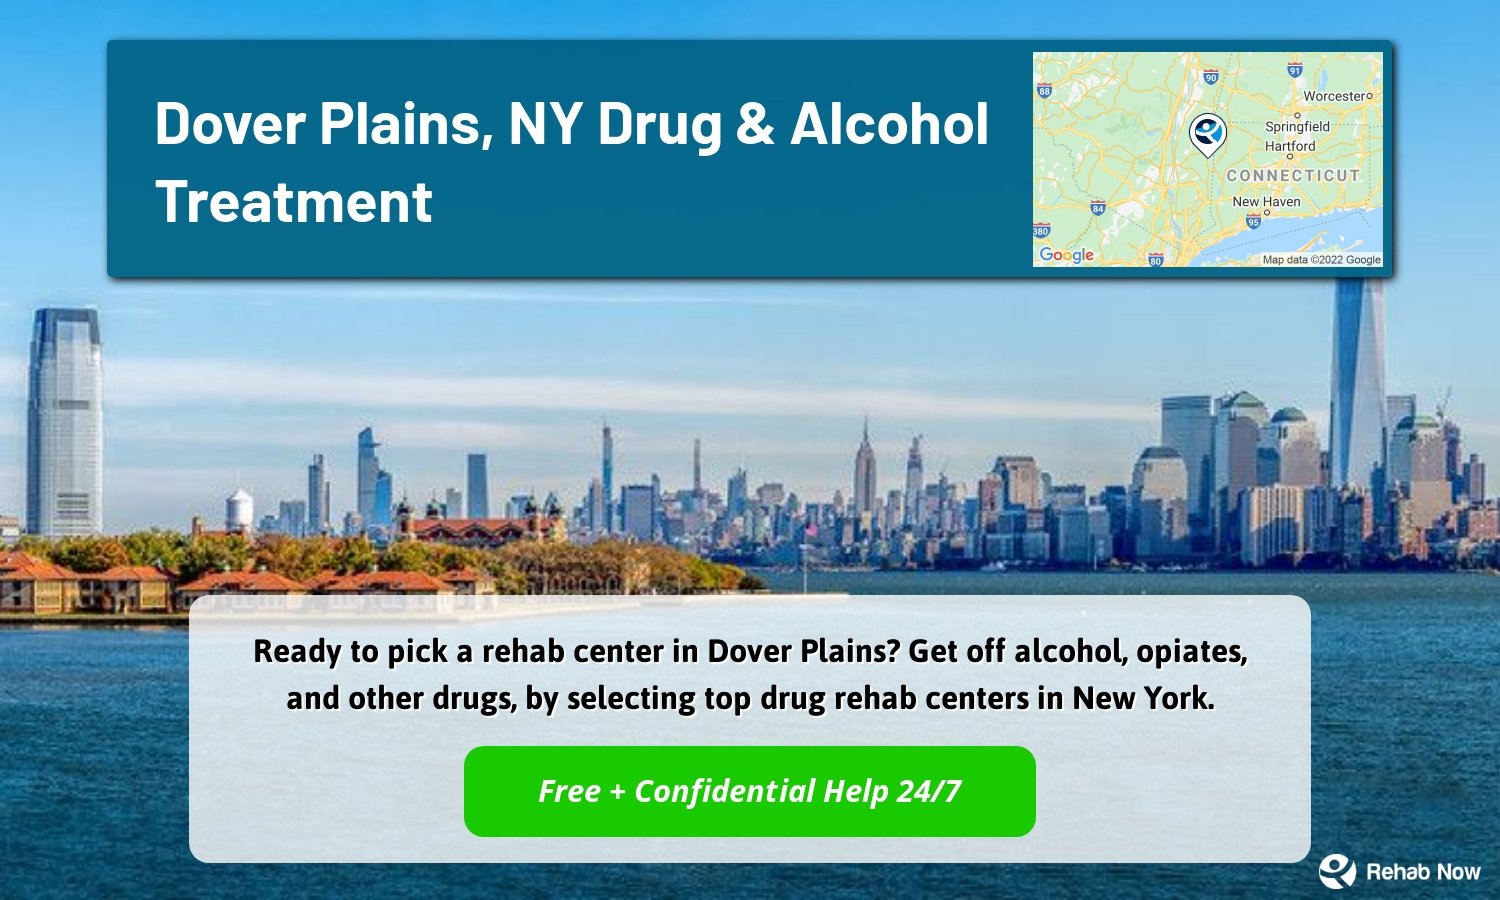 Ready to pick a rehab center in Dover Plains? Get off alcohol, opiates, and other drugs, by selecting top drug rehab centers in New York.